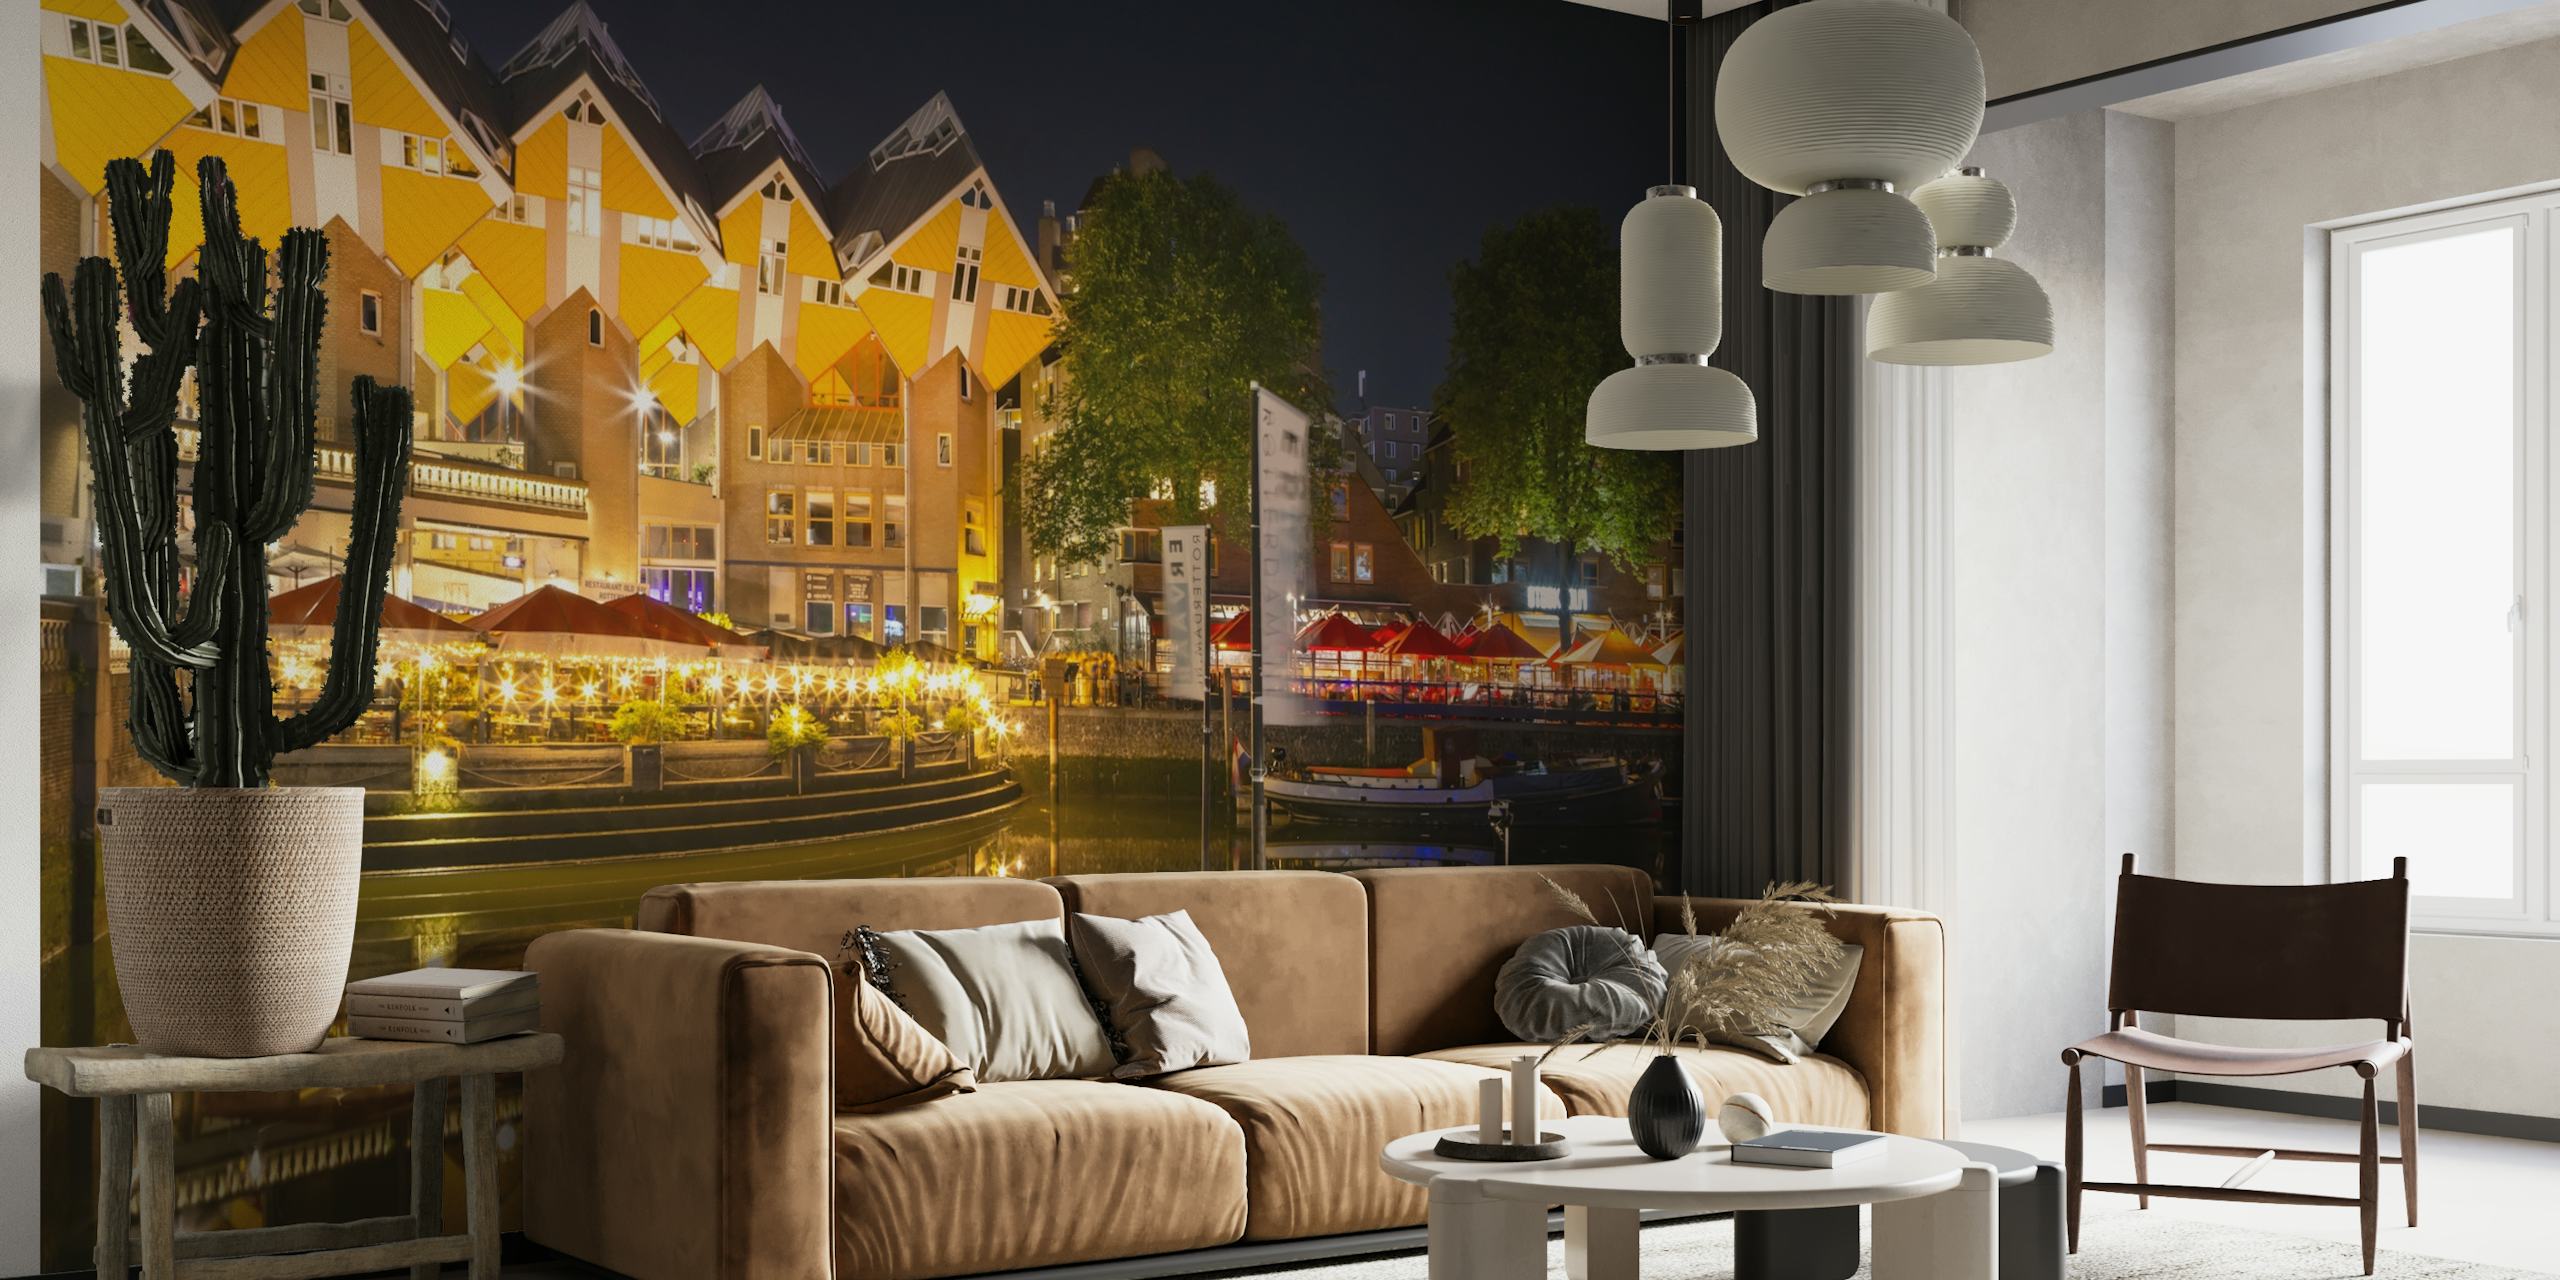 ROTTERDAM Oude Haven and Cube Houses by night papiers peint